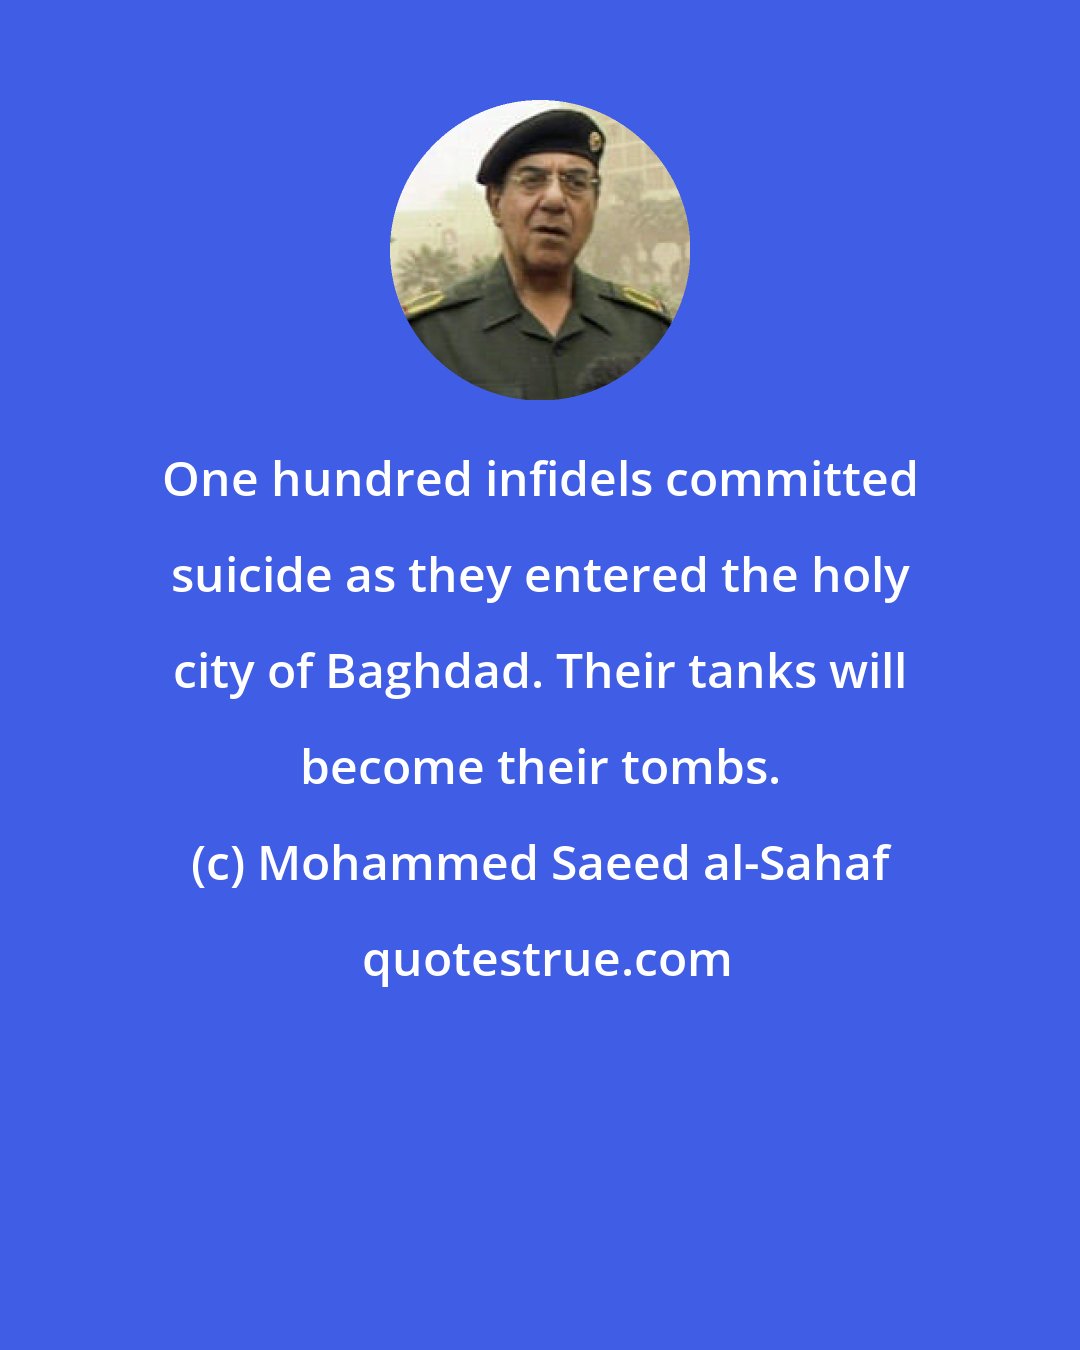 Mohammed Saeed al-Sahaf: One hundred infidels committed suicide as they entered the holy city of Baghdad. Their tanks will become their tombs.